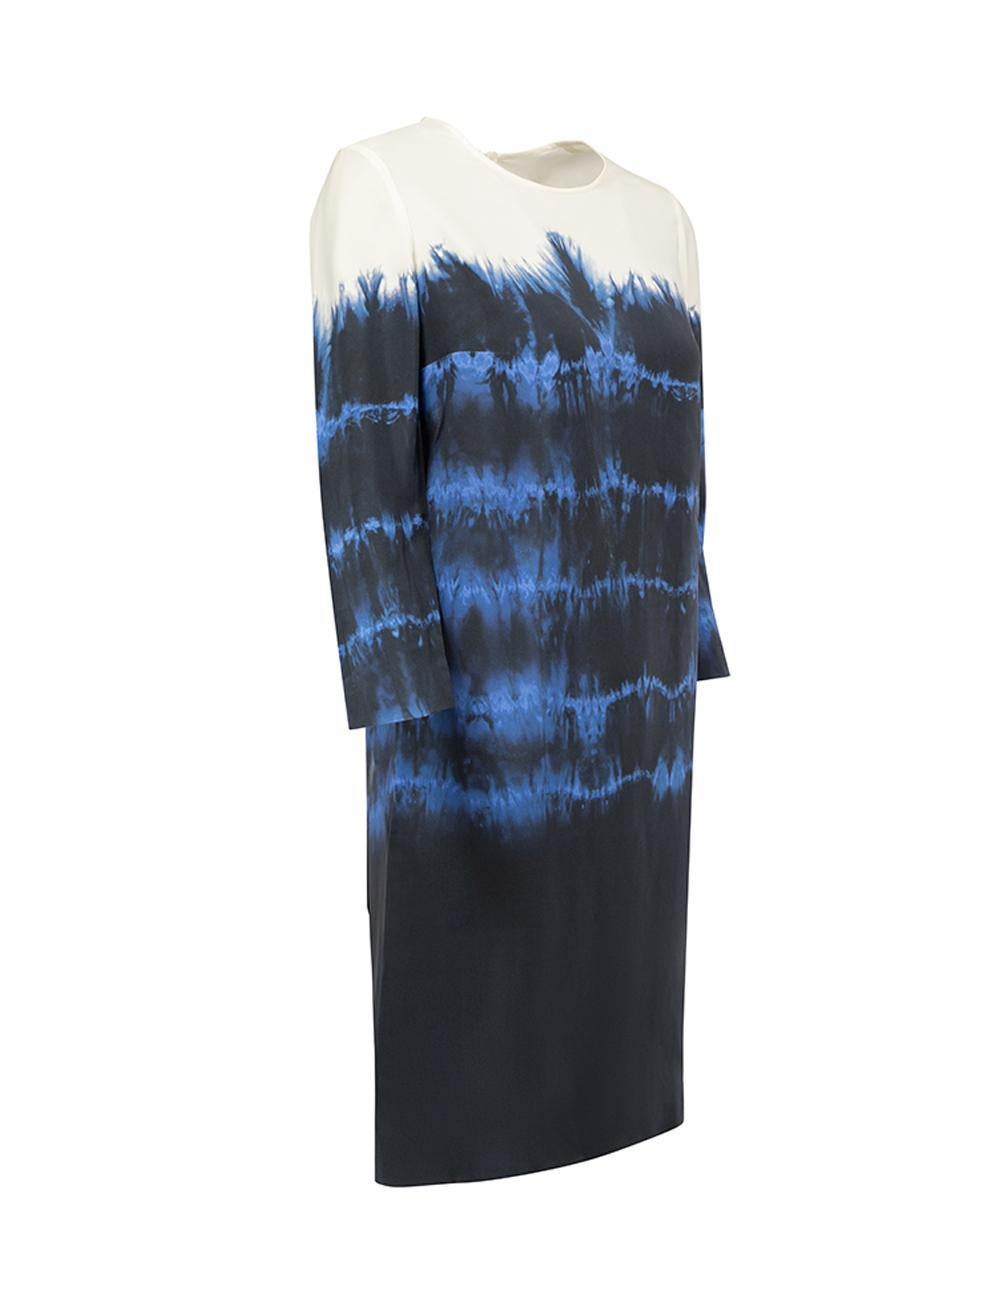 CONDITION is Good. Minor wear to dress is evident. Light wear the weave at front, back and both sleeves with lightening of threading and a pull at the left sleeve on this used Stella McCartney designer resale item.



Details


Blue

Silk

Mini